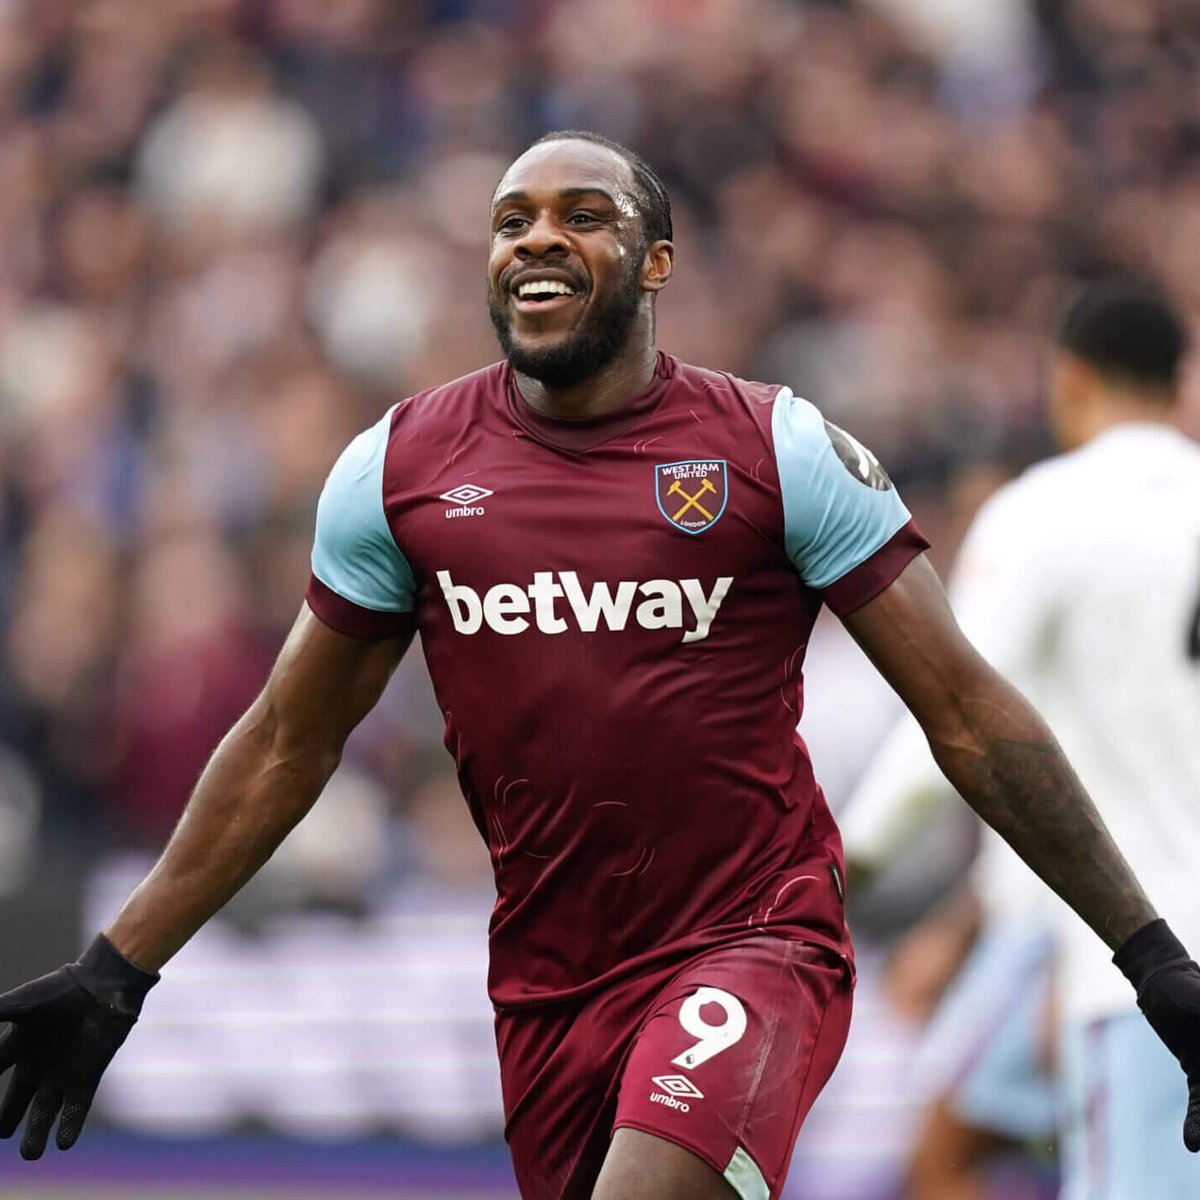 Michail Antonio is attracting interest from MLS clubs and teams in the Saudi Pro League. [@RoshaneSport] Keep or sell? 🤔